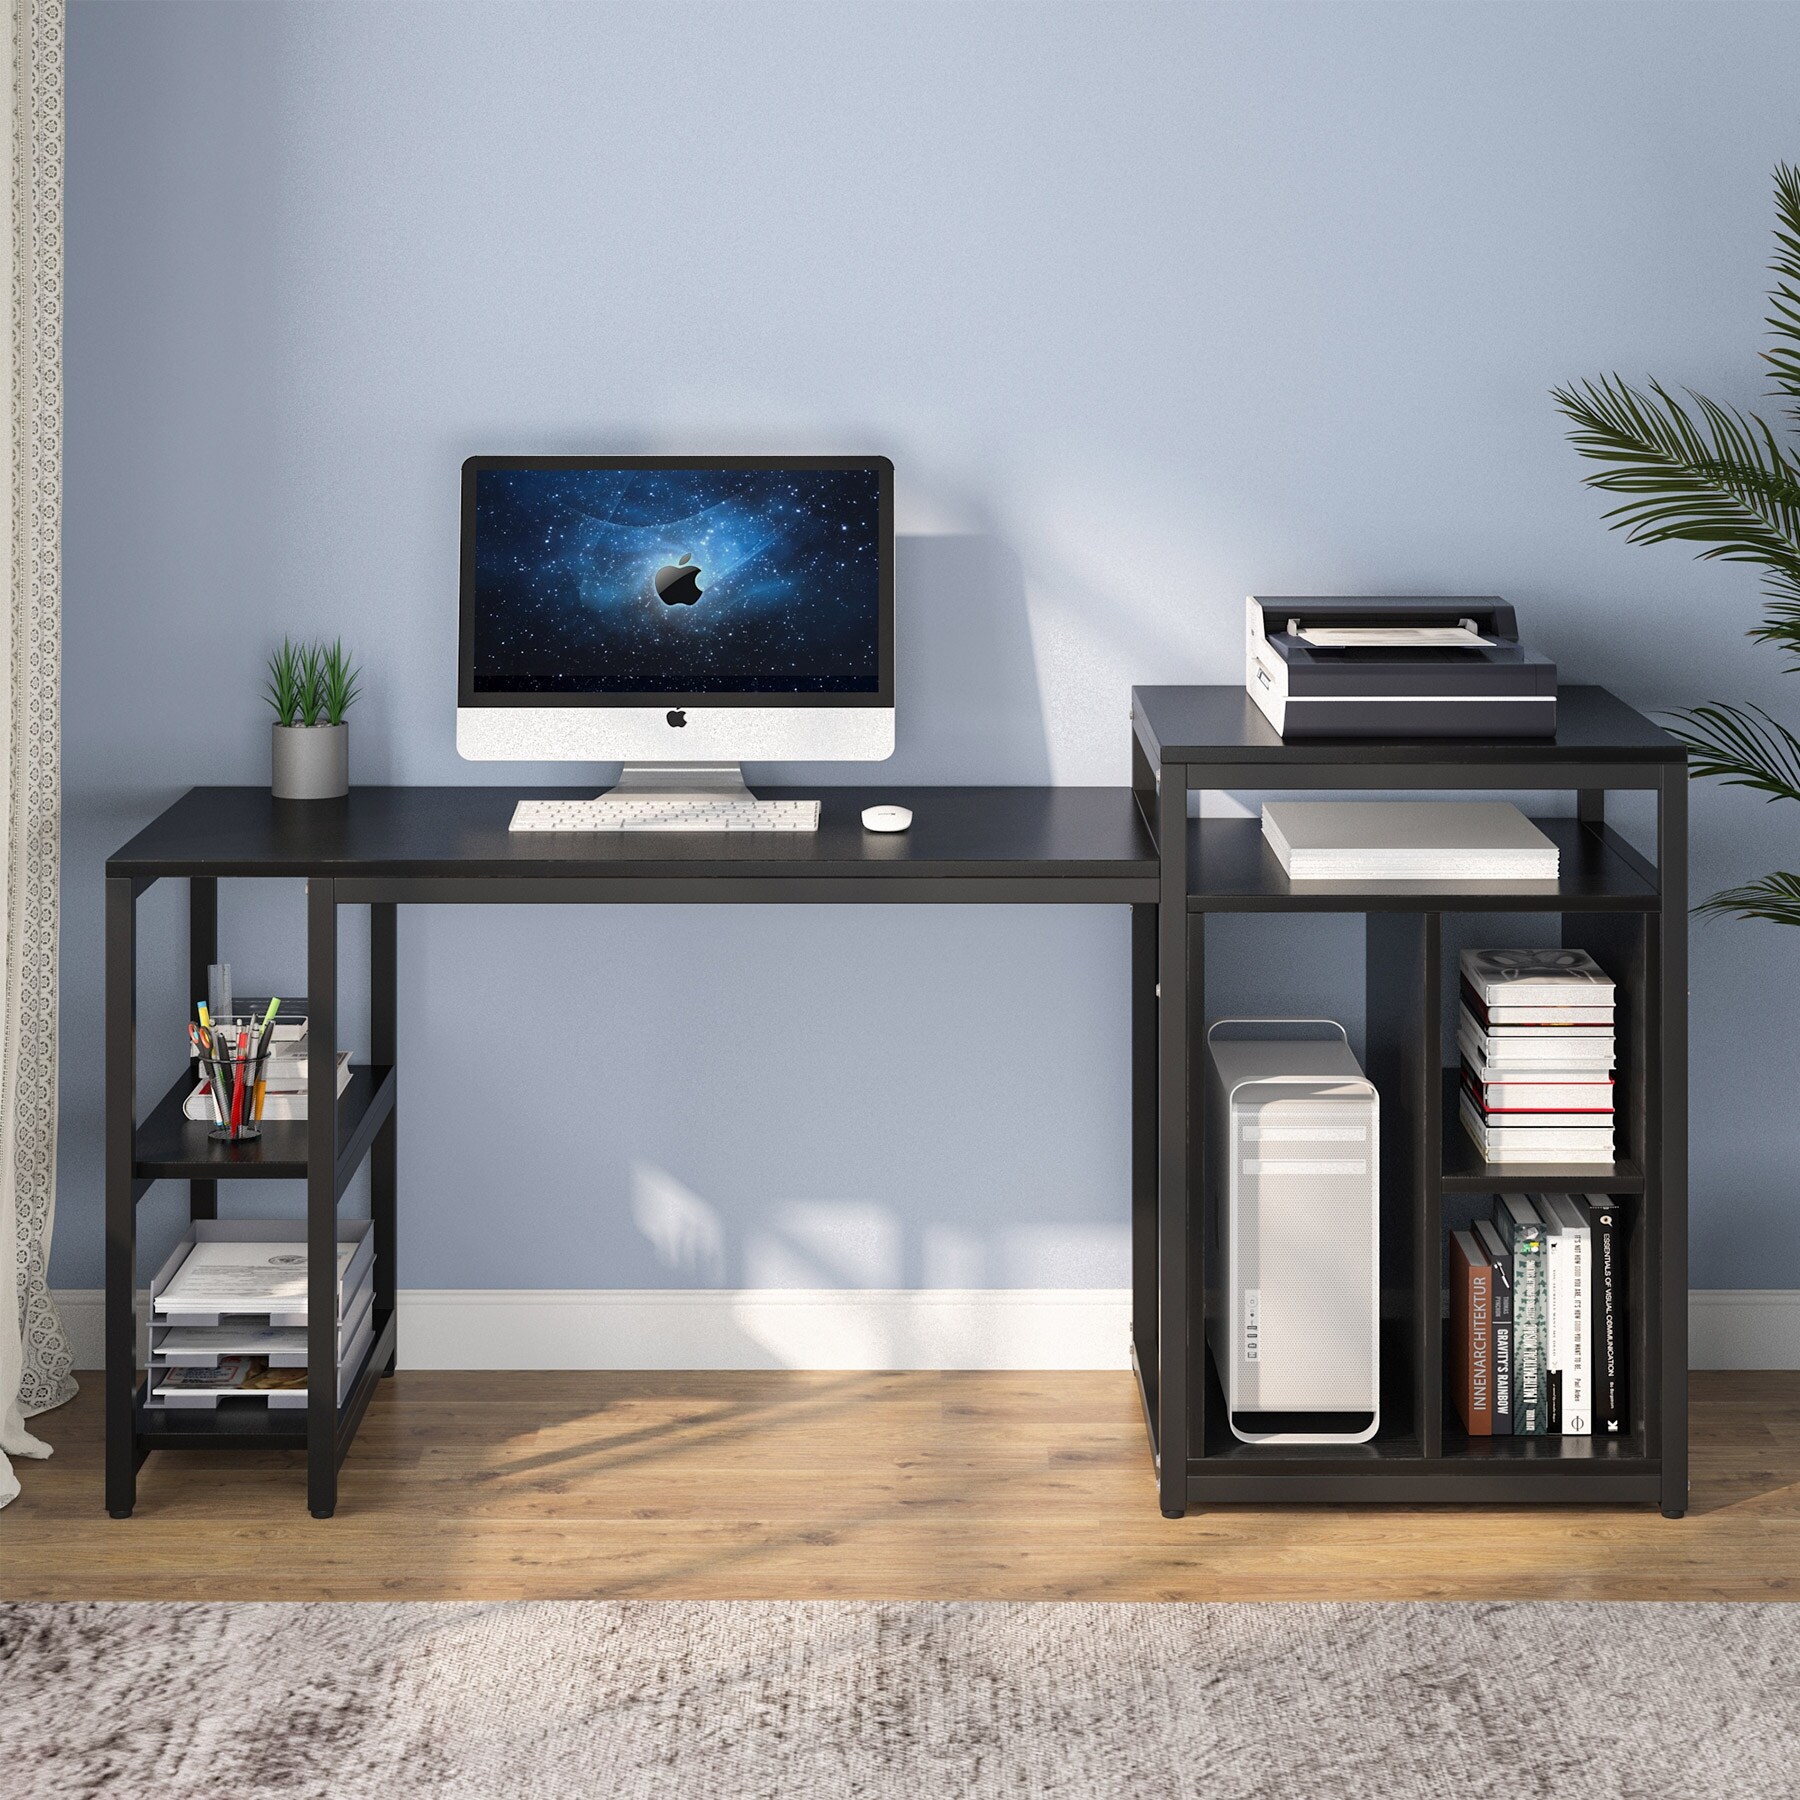 https://ak1.ostkcdn.com/images/products/is/images/direct/0bd1425c37f004c82b4357197aeaaf5550ec7f4f/Tribesigns-47-Inch-Computer-Desk-with-Reversible-Storage-Shelves.jpg